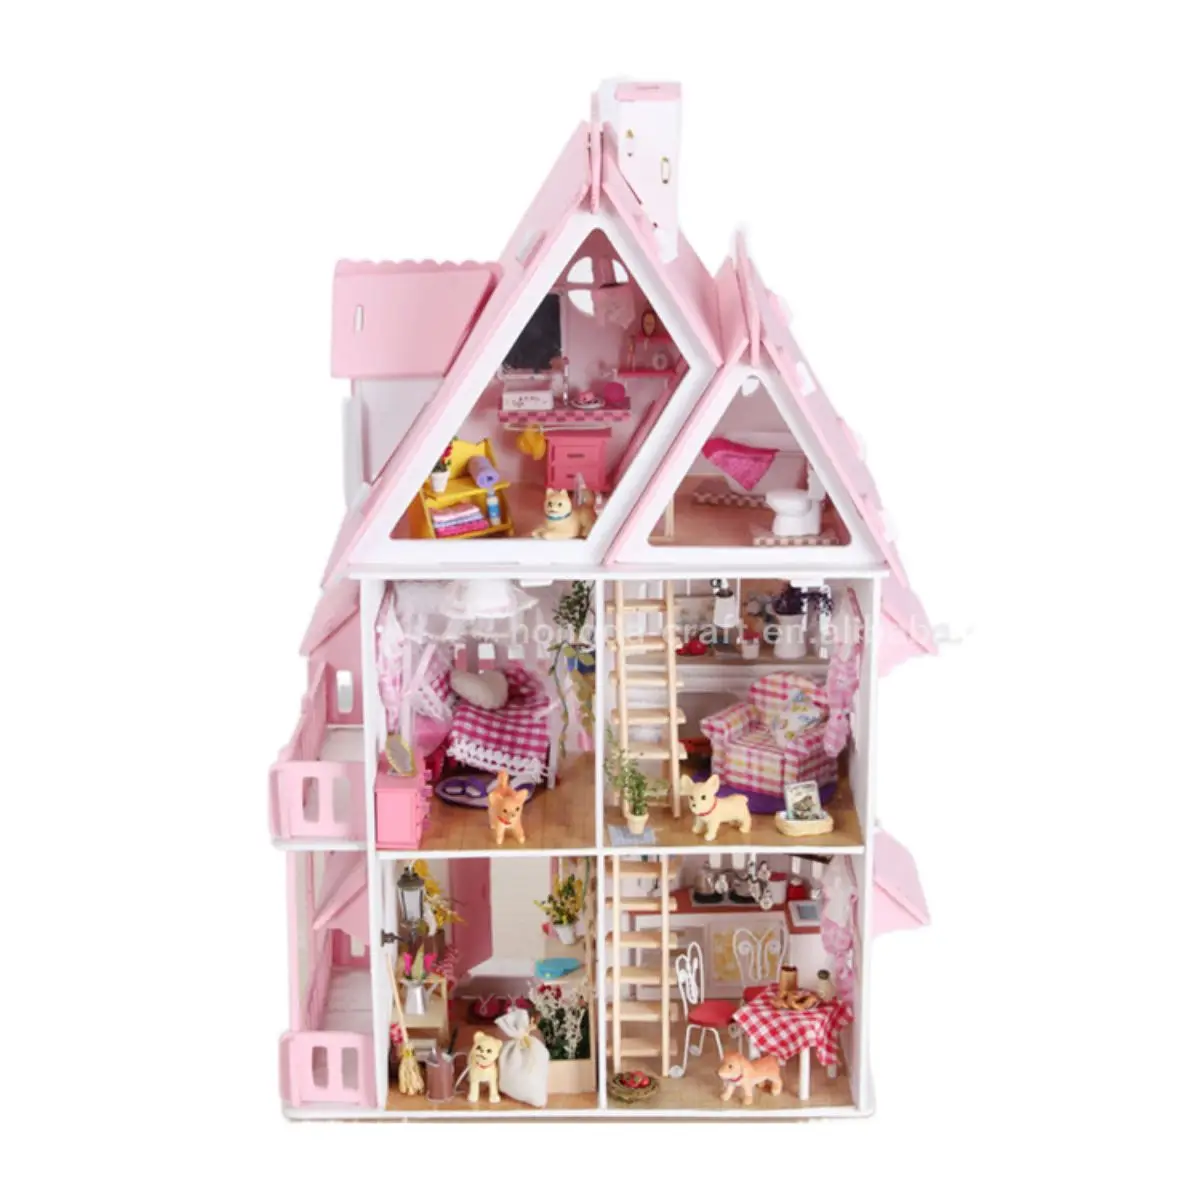 New Arrival Mini House Wood Toy Diy Doll Furniture Wooden Toy Assembling Tool Pink Castle